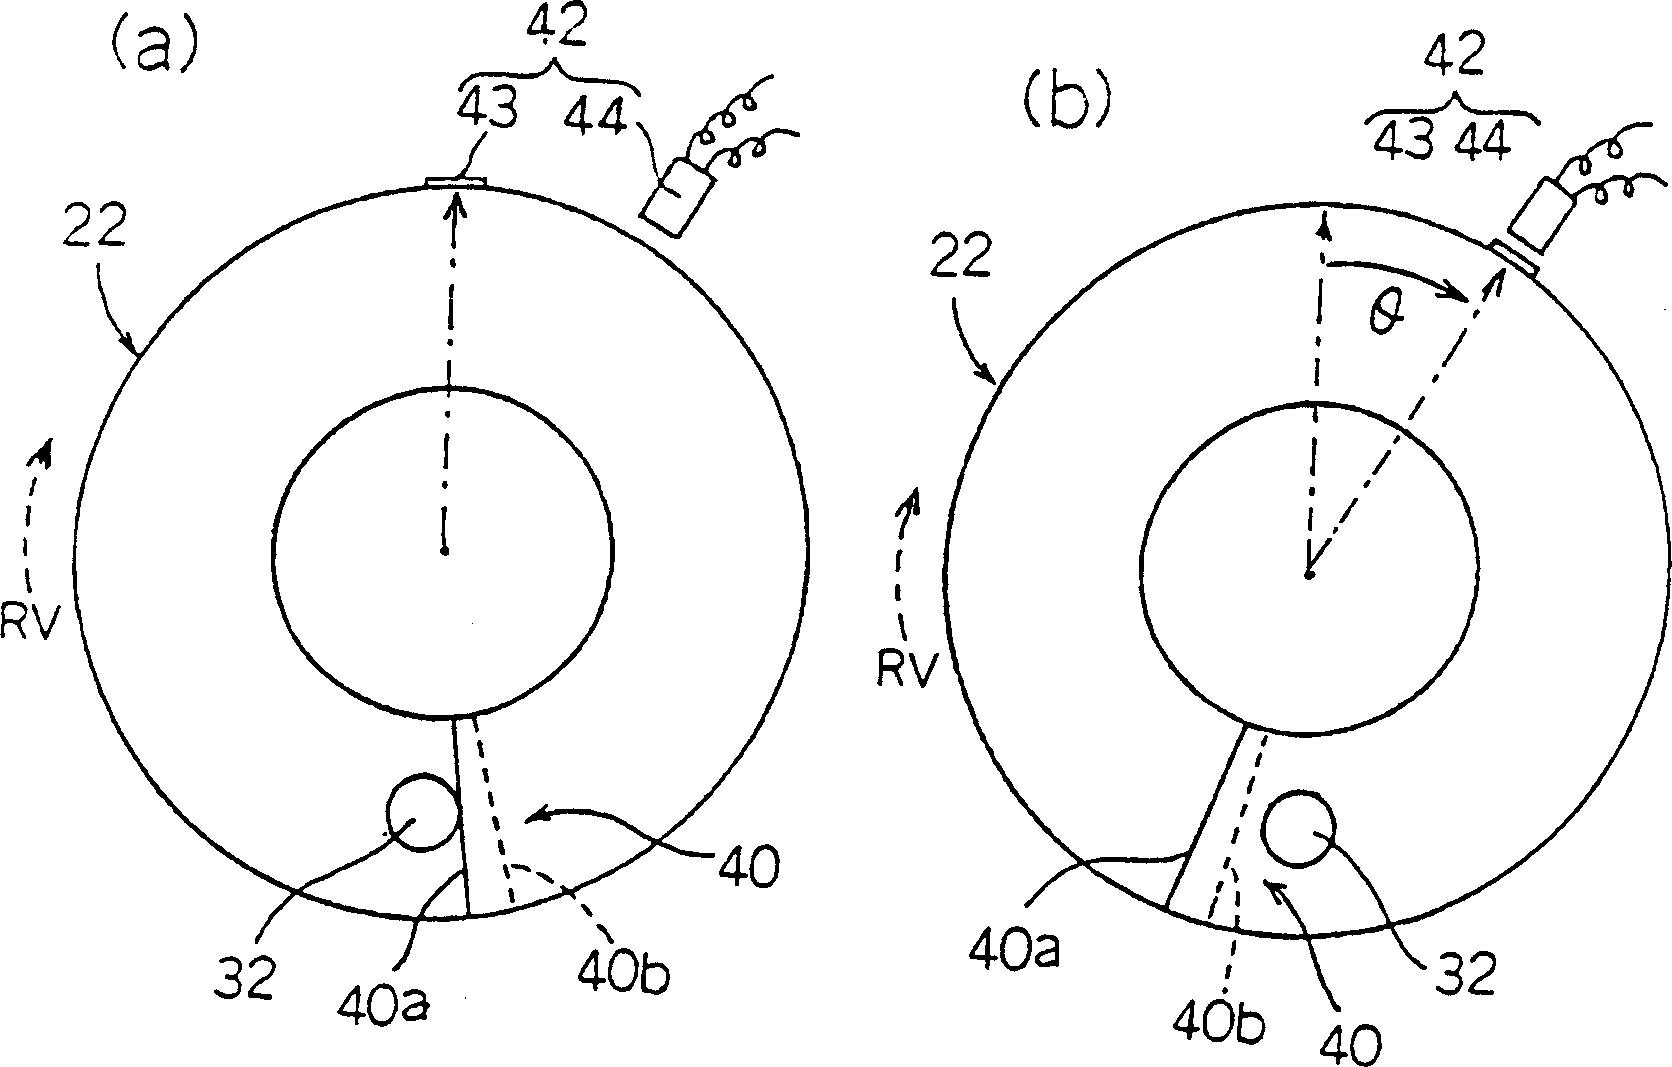 Torque control method for power rotary tool